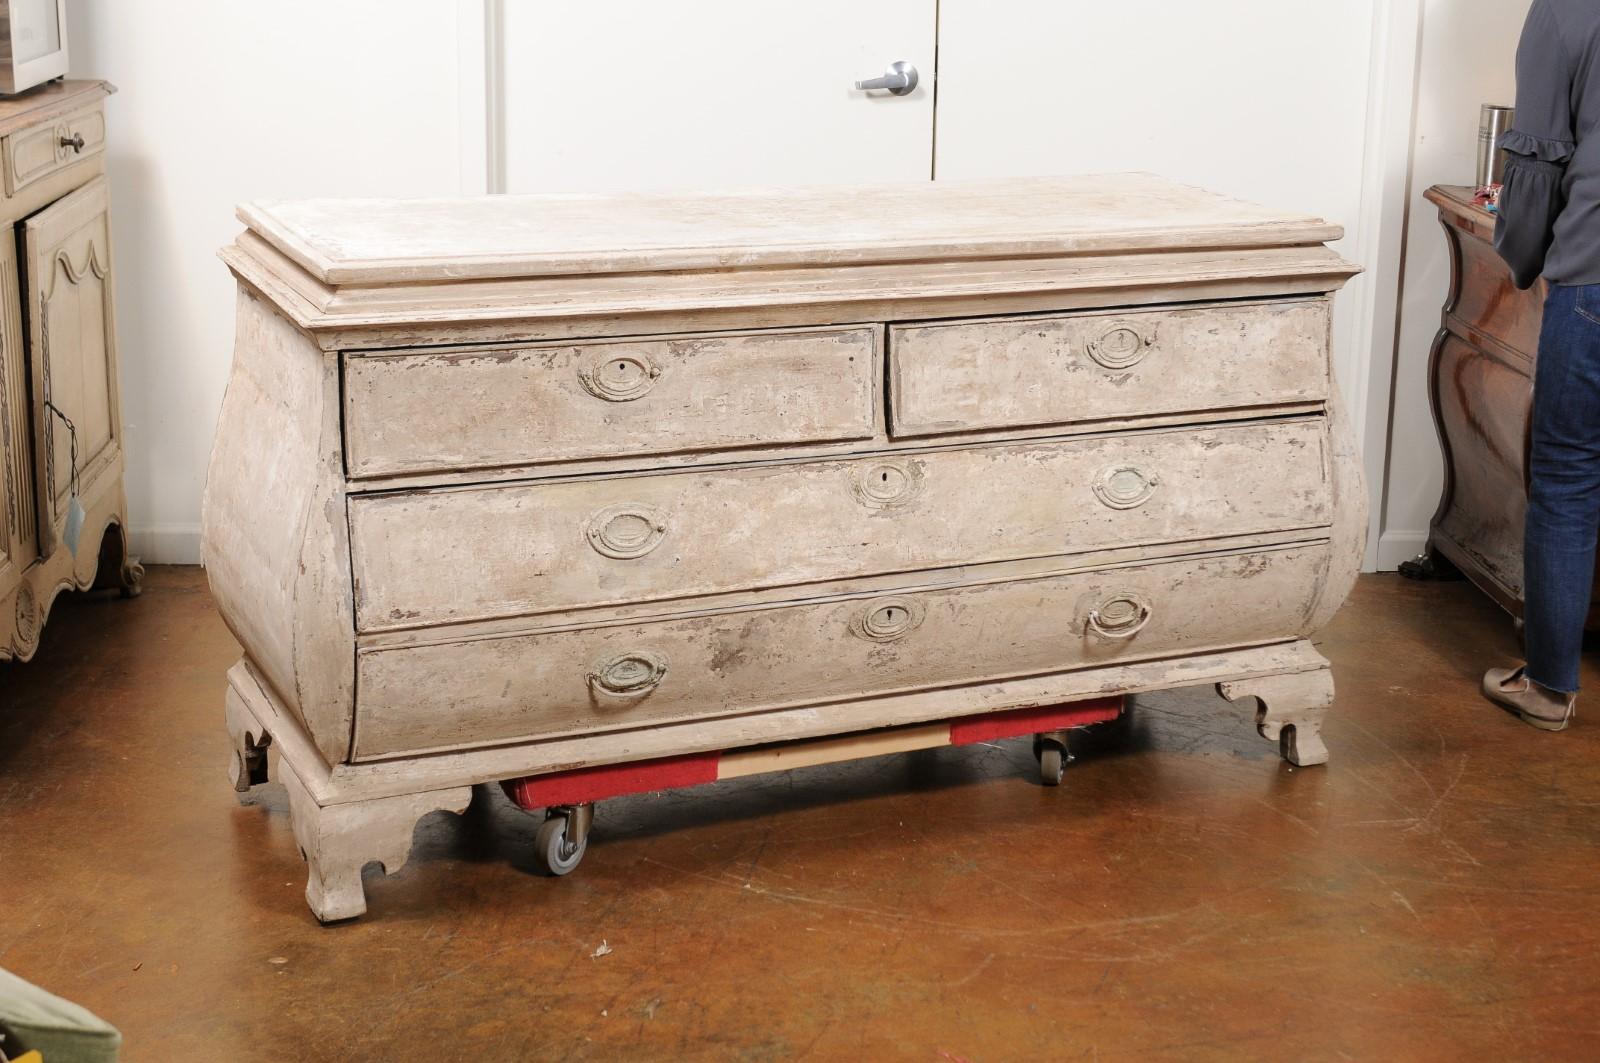 A large French Rococo style hand painted bombé chest-of-drawers from the 19th century with raised top and four drawers. This exquisite French painted bombé dresser features a rectangular raised top sitting above four drawers. These drawers (two